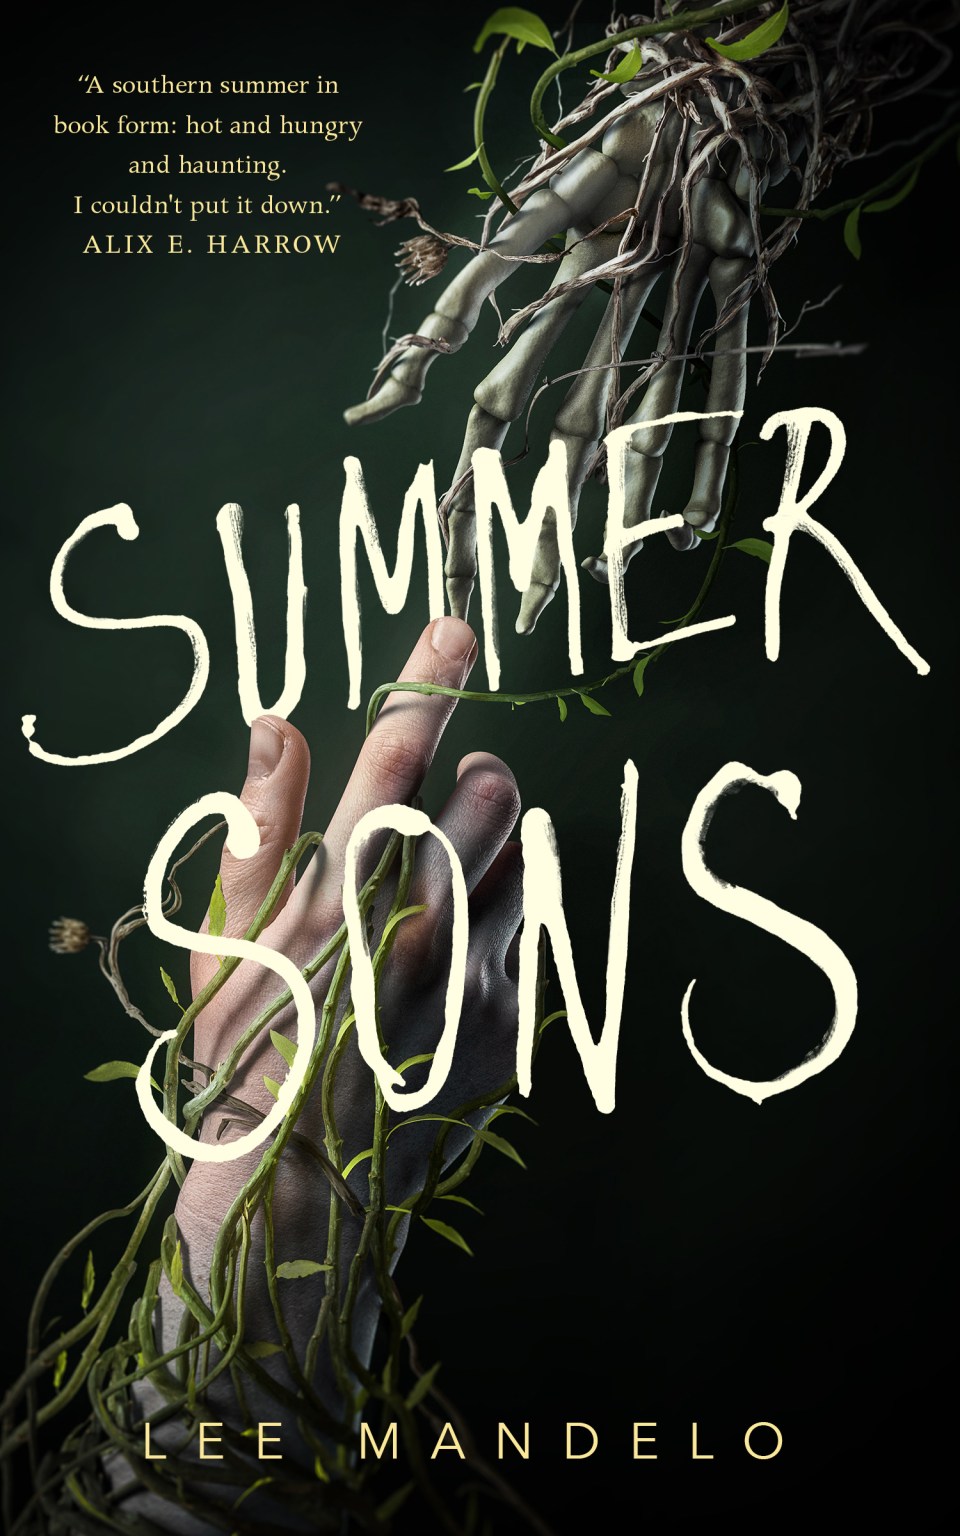 Summer Sons by Lee Mandelo book cover